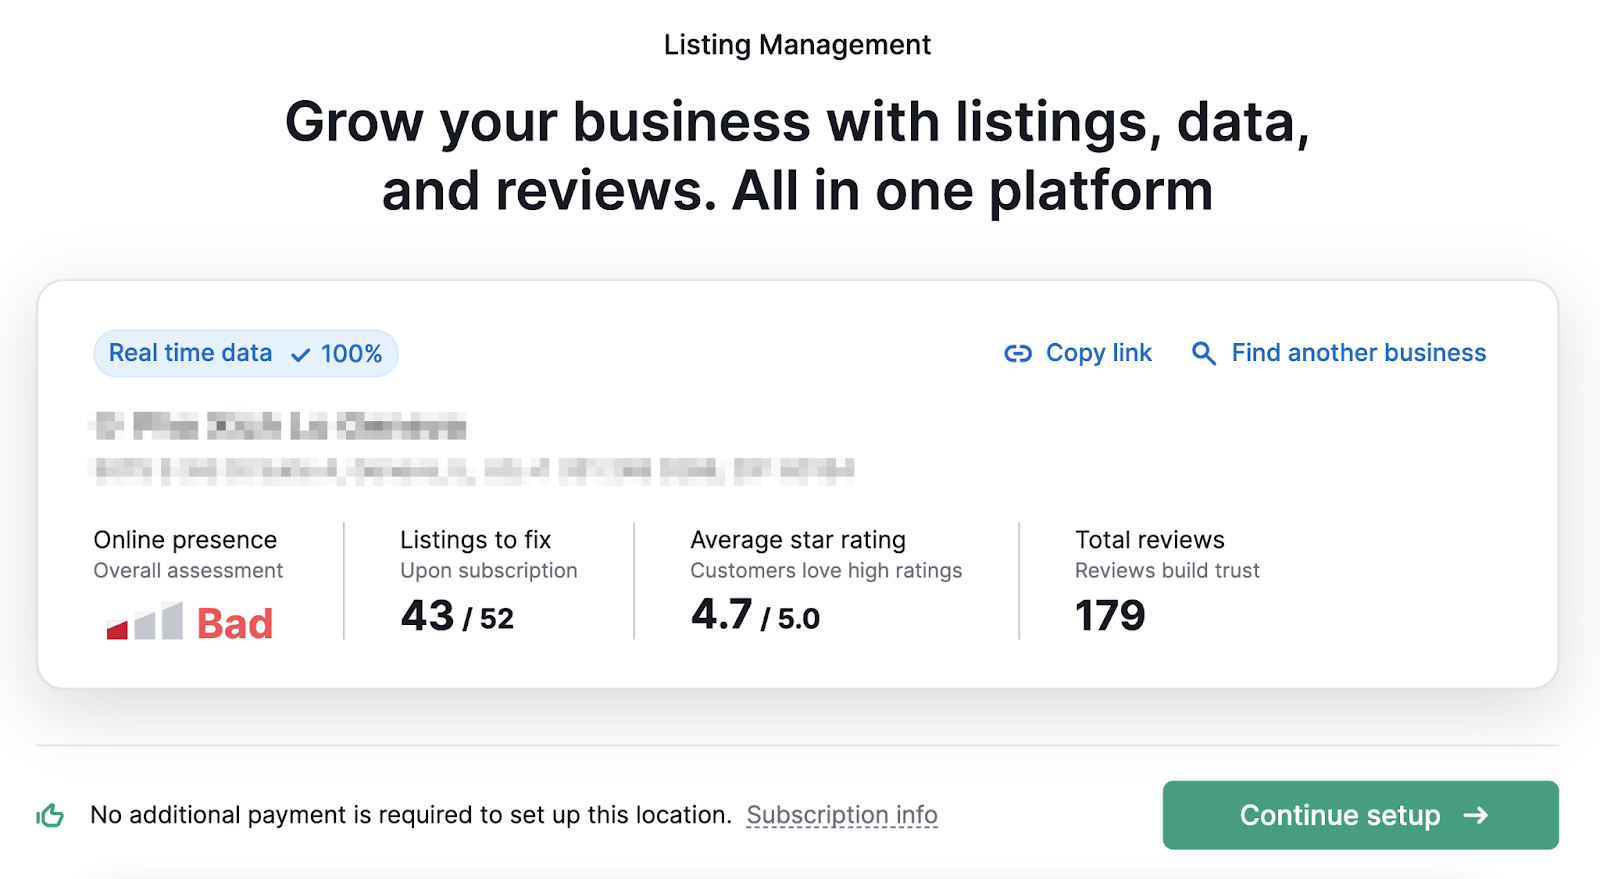 Listing Management tool shows your current online presence, total listings, listings to fix, and average star rating